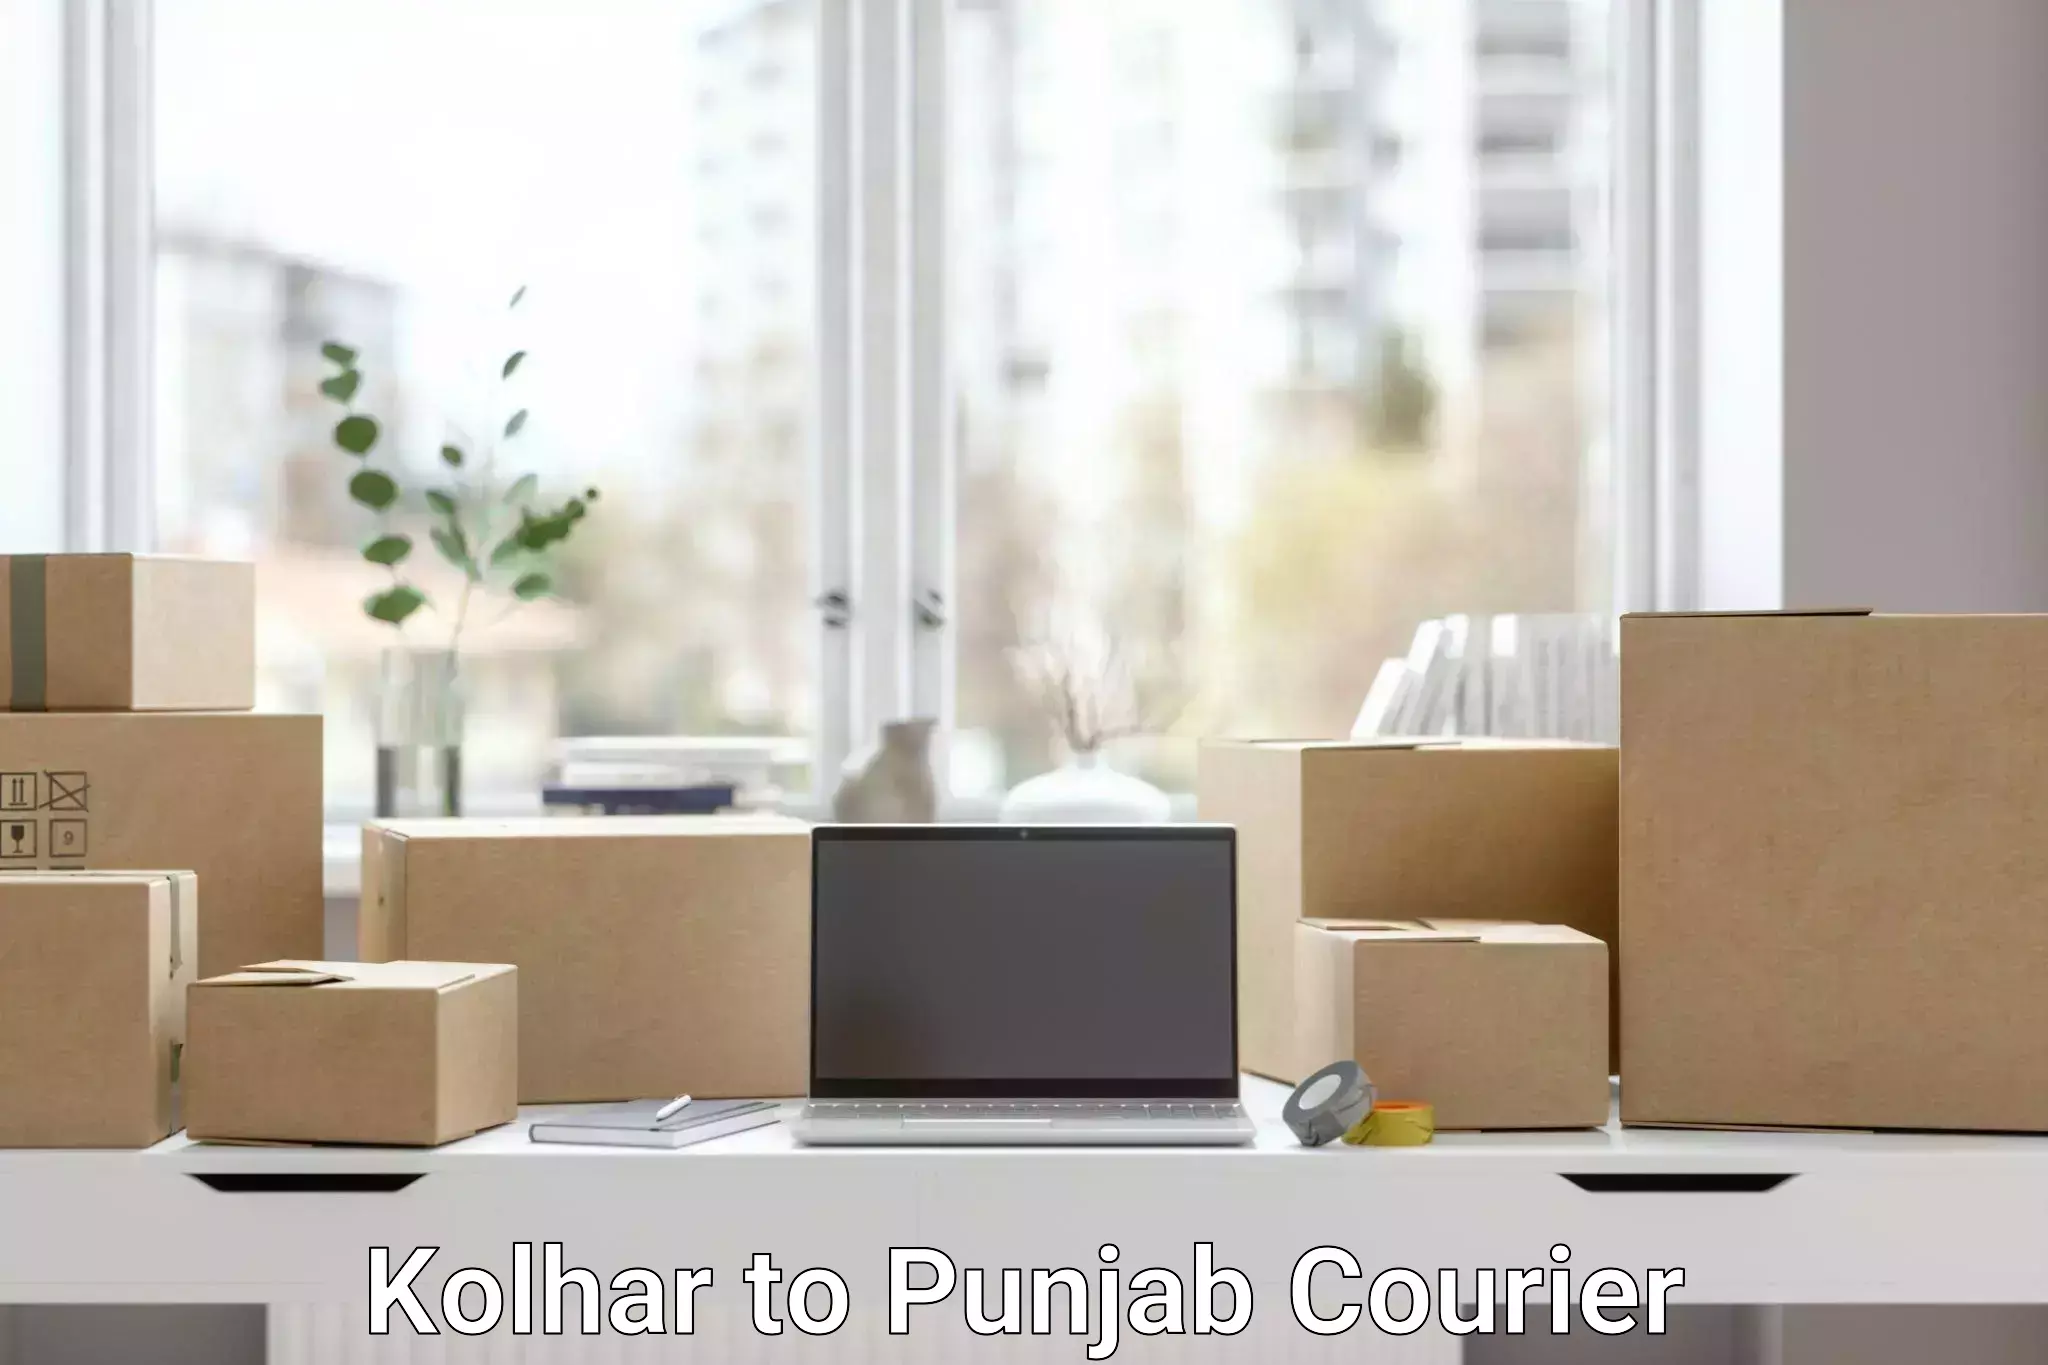 Local courier options Kolhar to Sirhind Fatehgarh